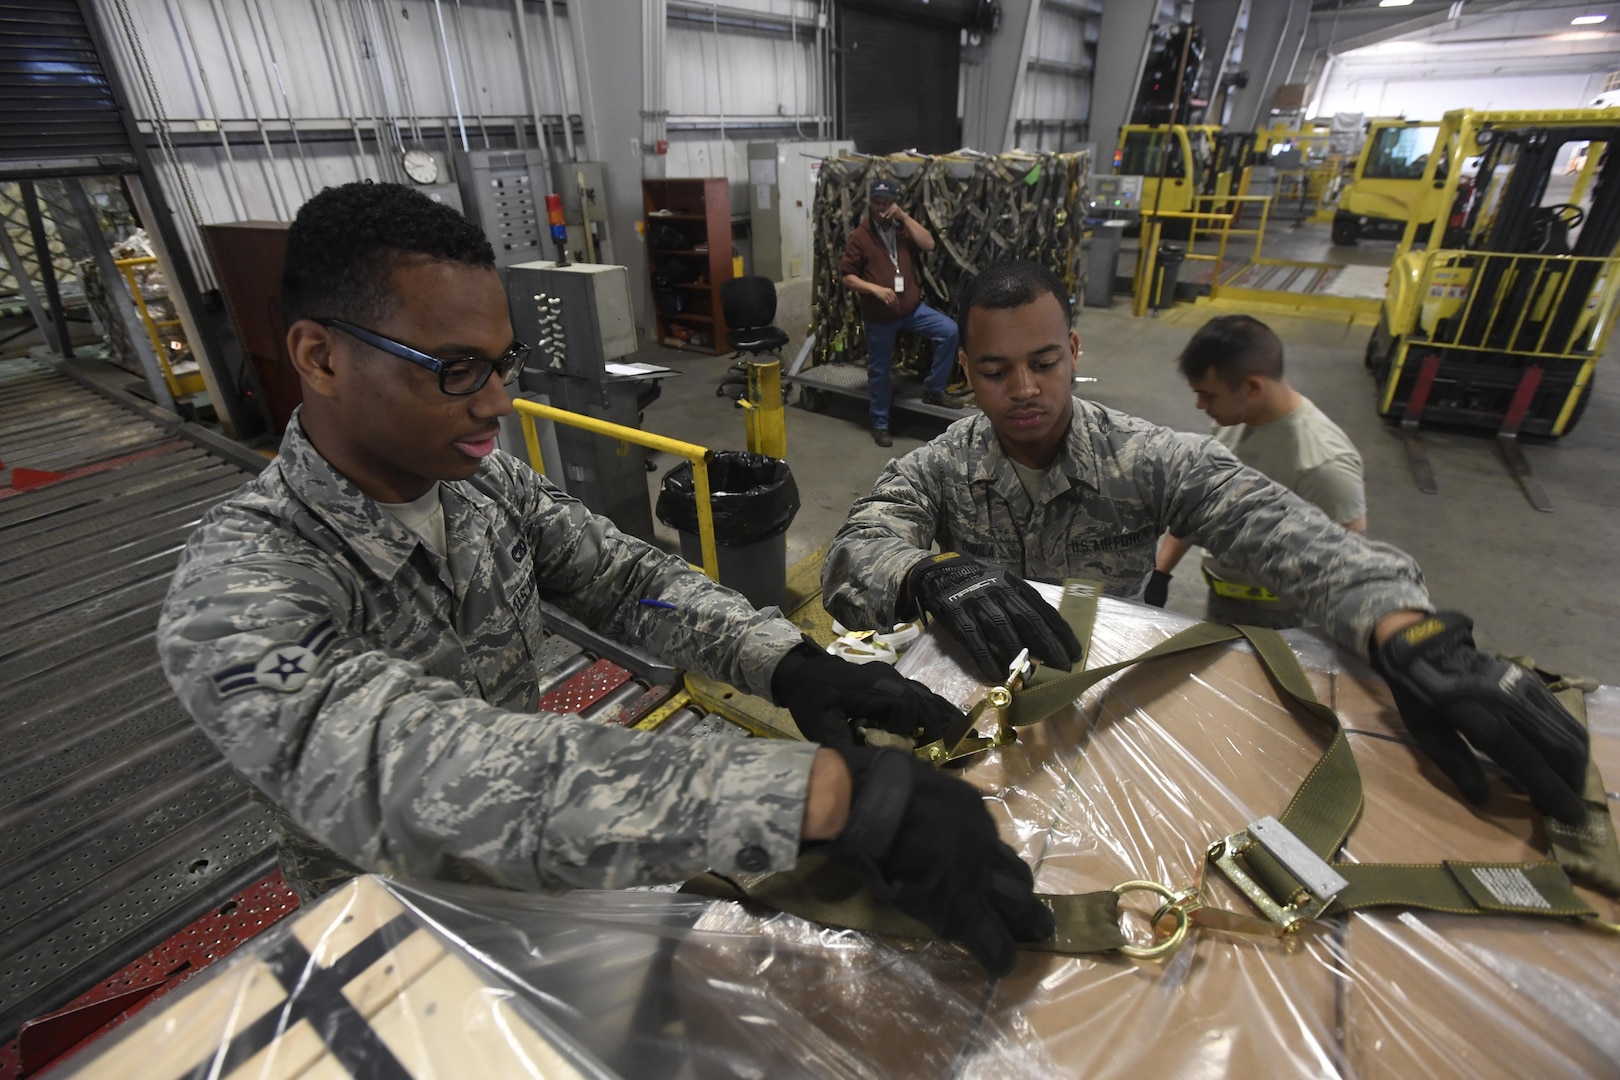 Airman 1st Class Isaiah Reed and Airman 1st Class Ryan Davila, 305th Aerial Port Squadron cargo processors, strap down a cargo pallet in the Aerial Port warehouse at Joint Base McGuire-Dix-Lakehurst, New Jersey, June 2, 2017. The cargo prepared here typically finds its way to Ramstein Air Base before being disseminated to installations around the world. 